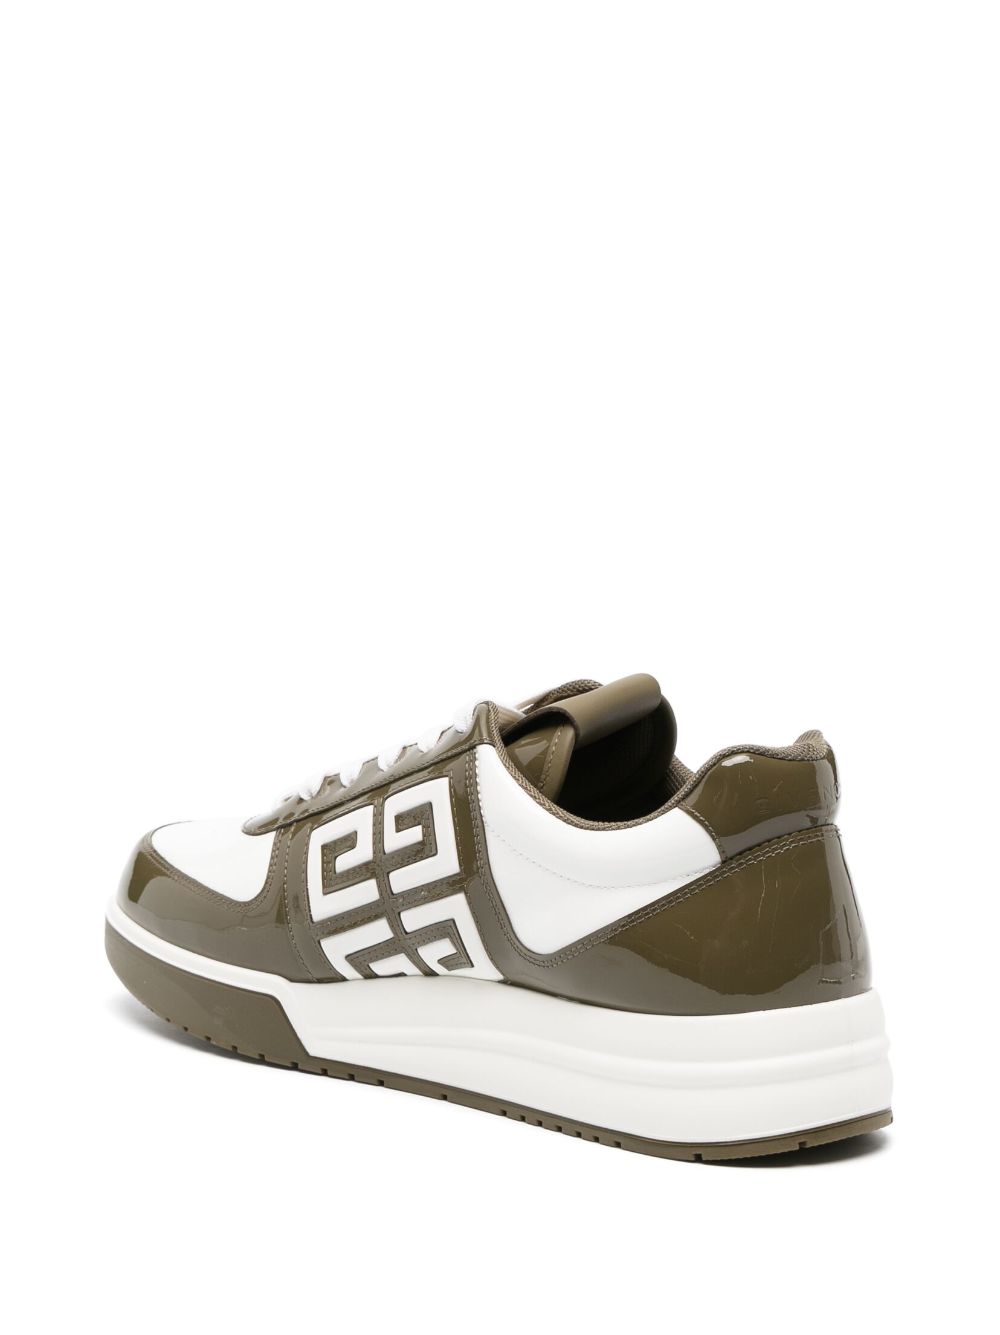 Shop Givenchy G4 Panelled Leather Sneakers In Green